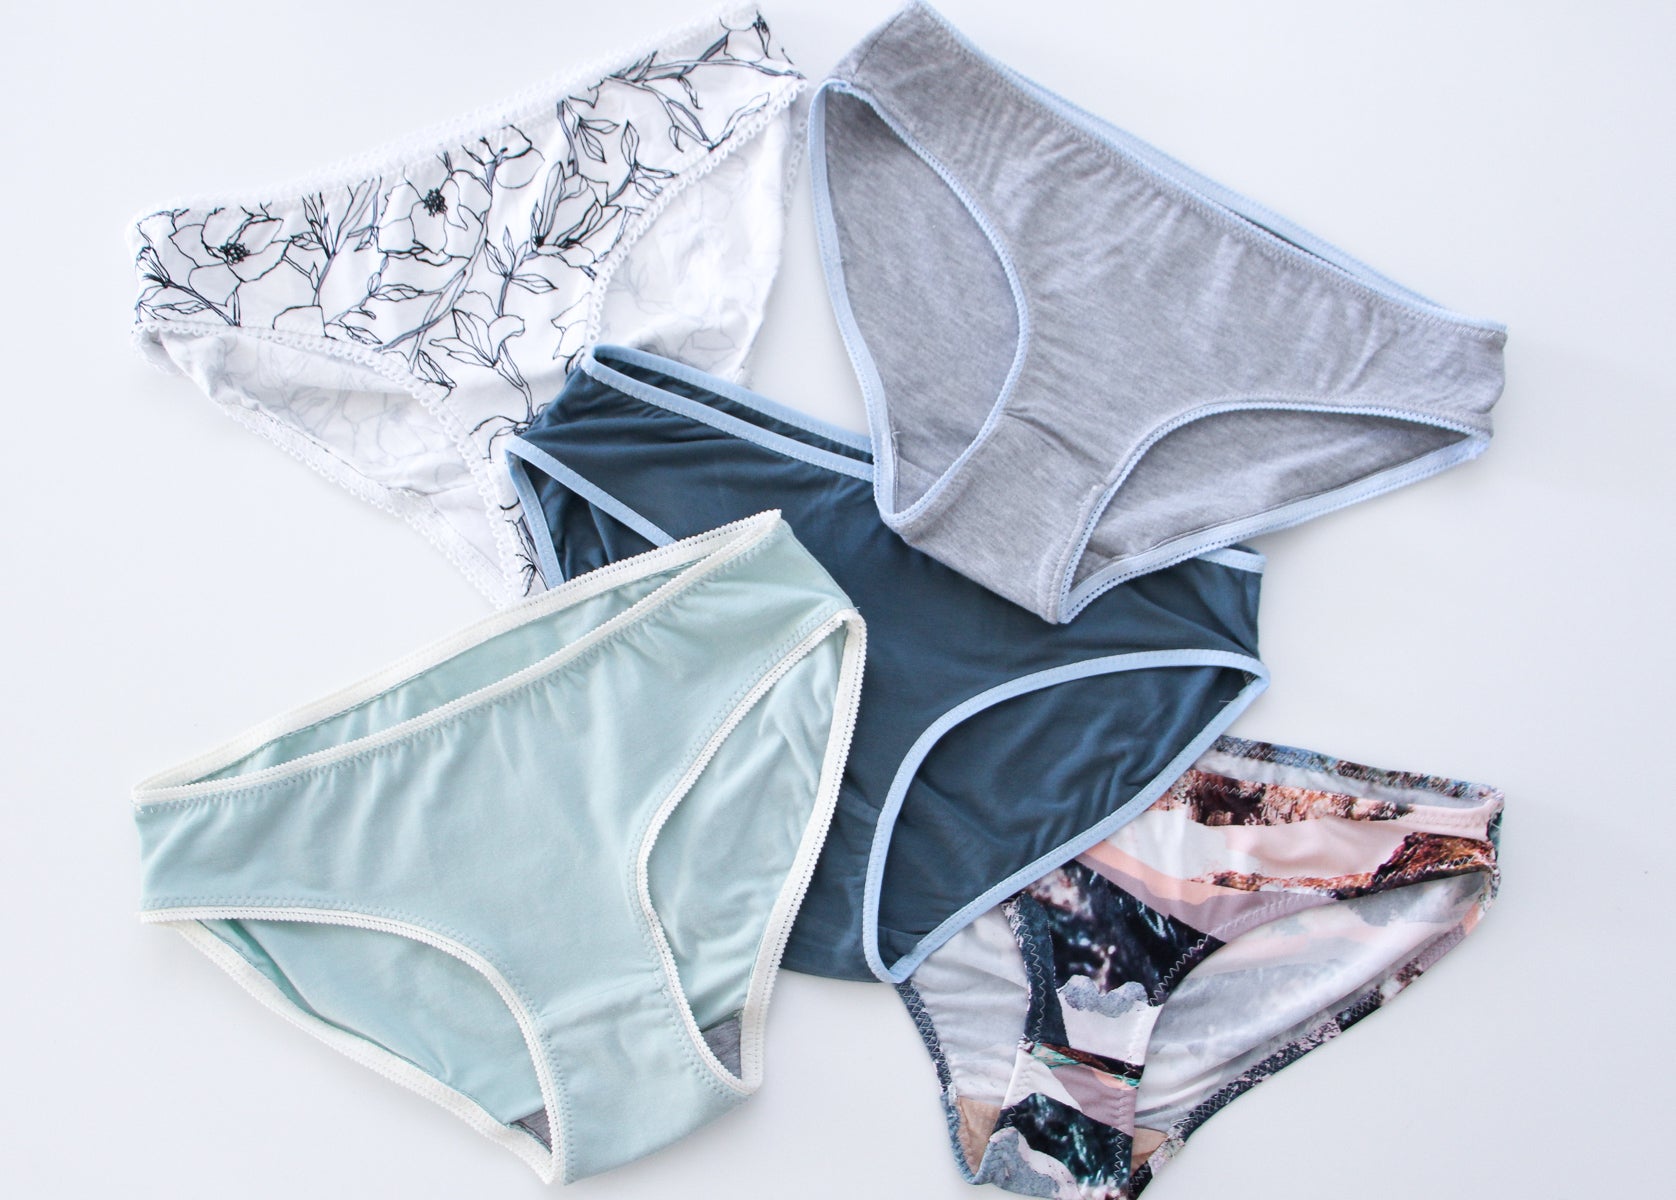 Acacia Underwear Sewing Pattern  FREE for Newsletter Subscribers